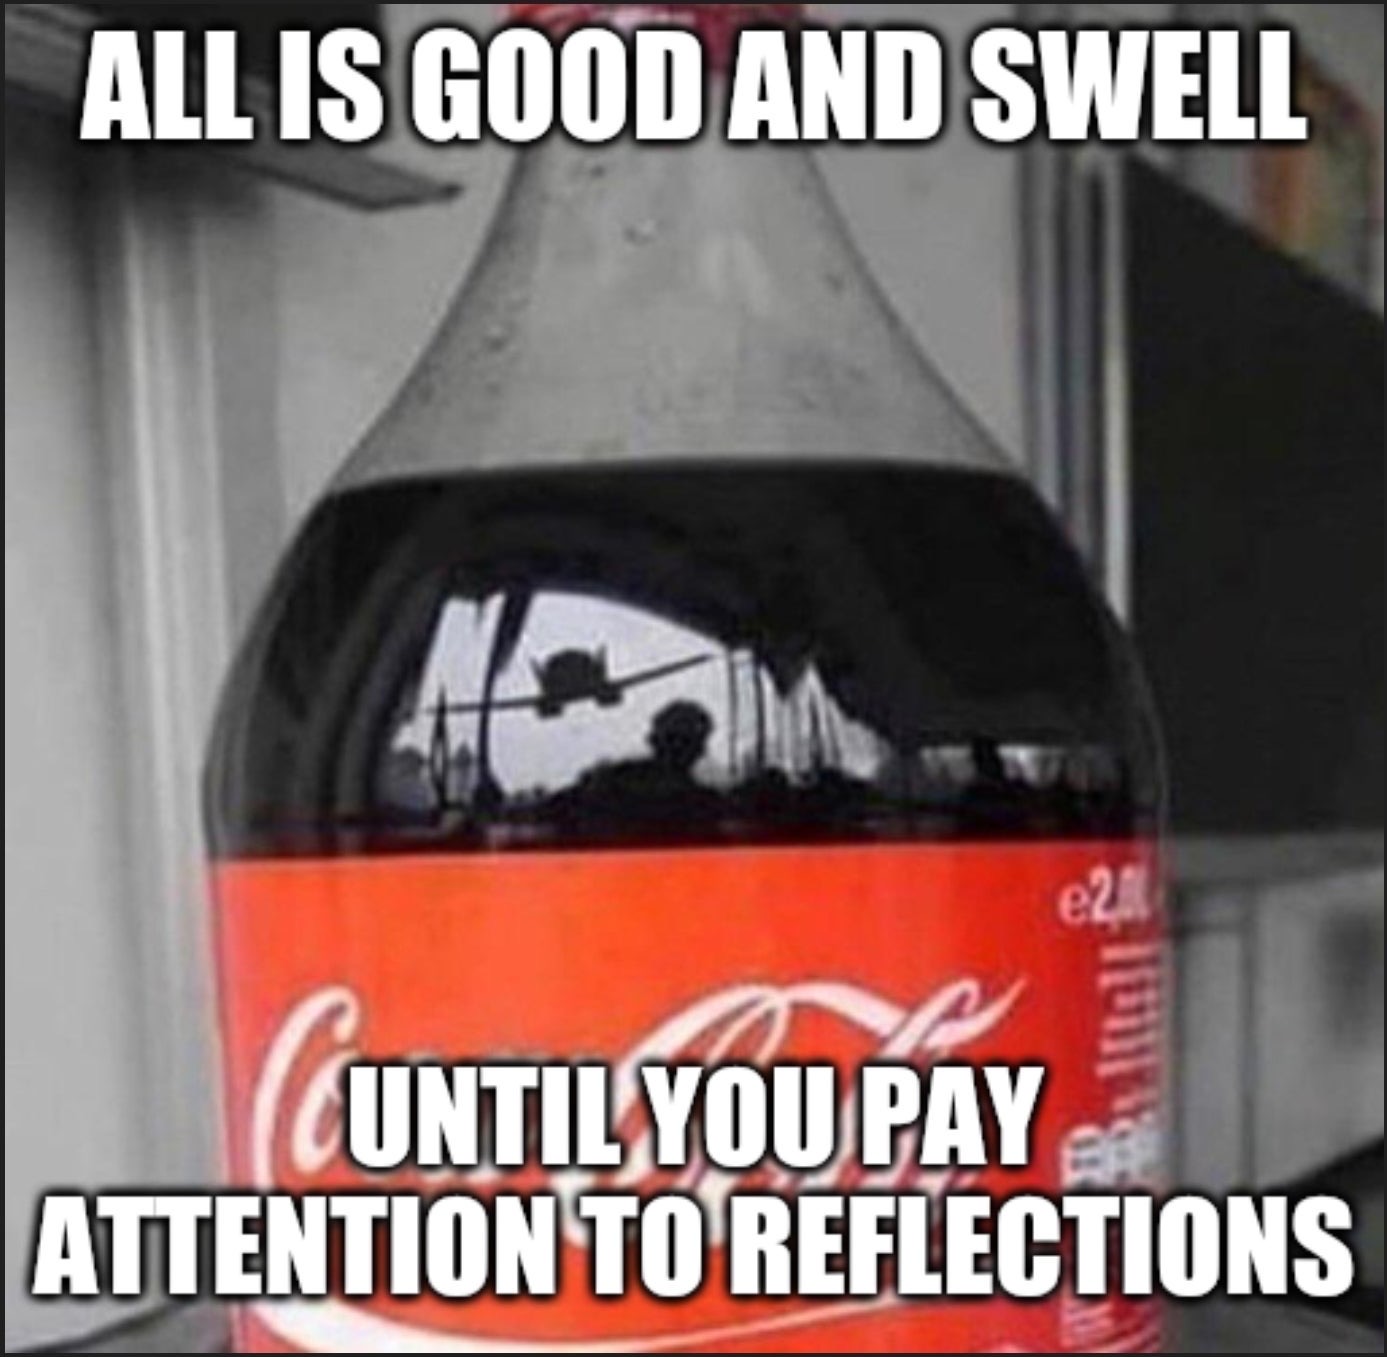 dank memes car - All Is Good And Swell e21 Cuntil You Pay Attention To Reflections